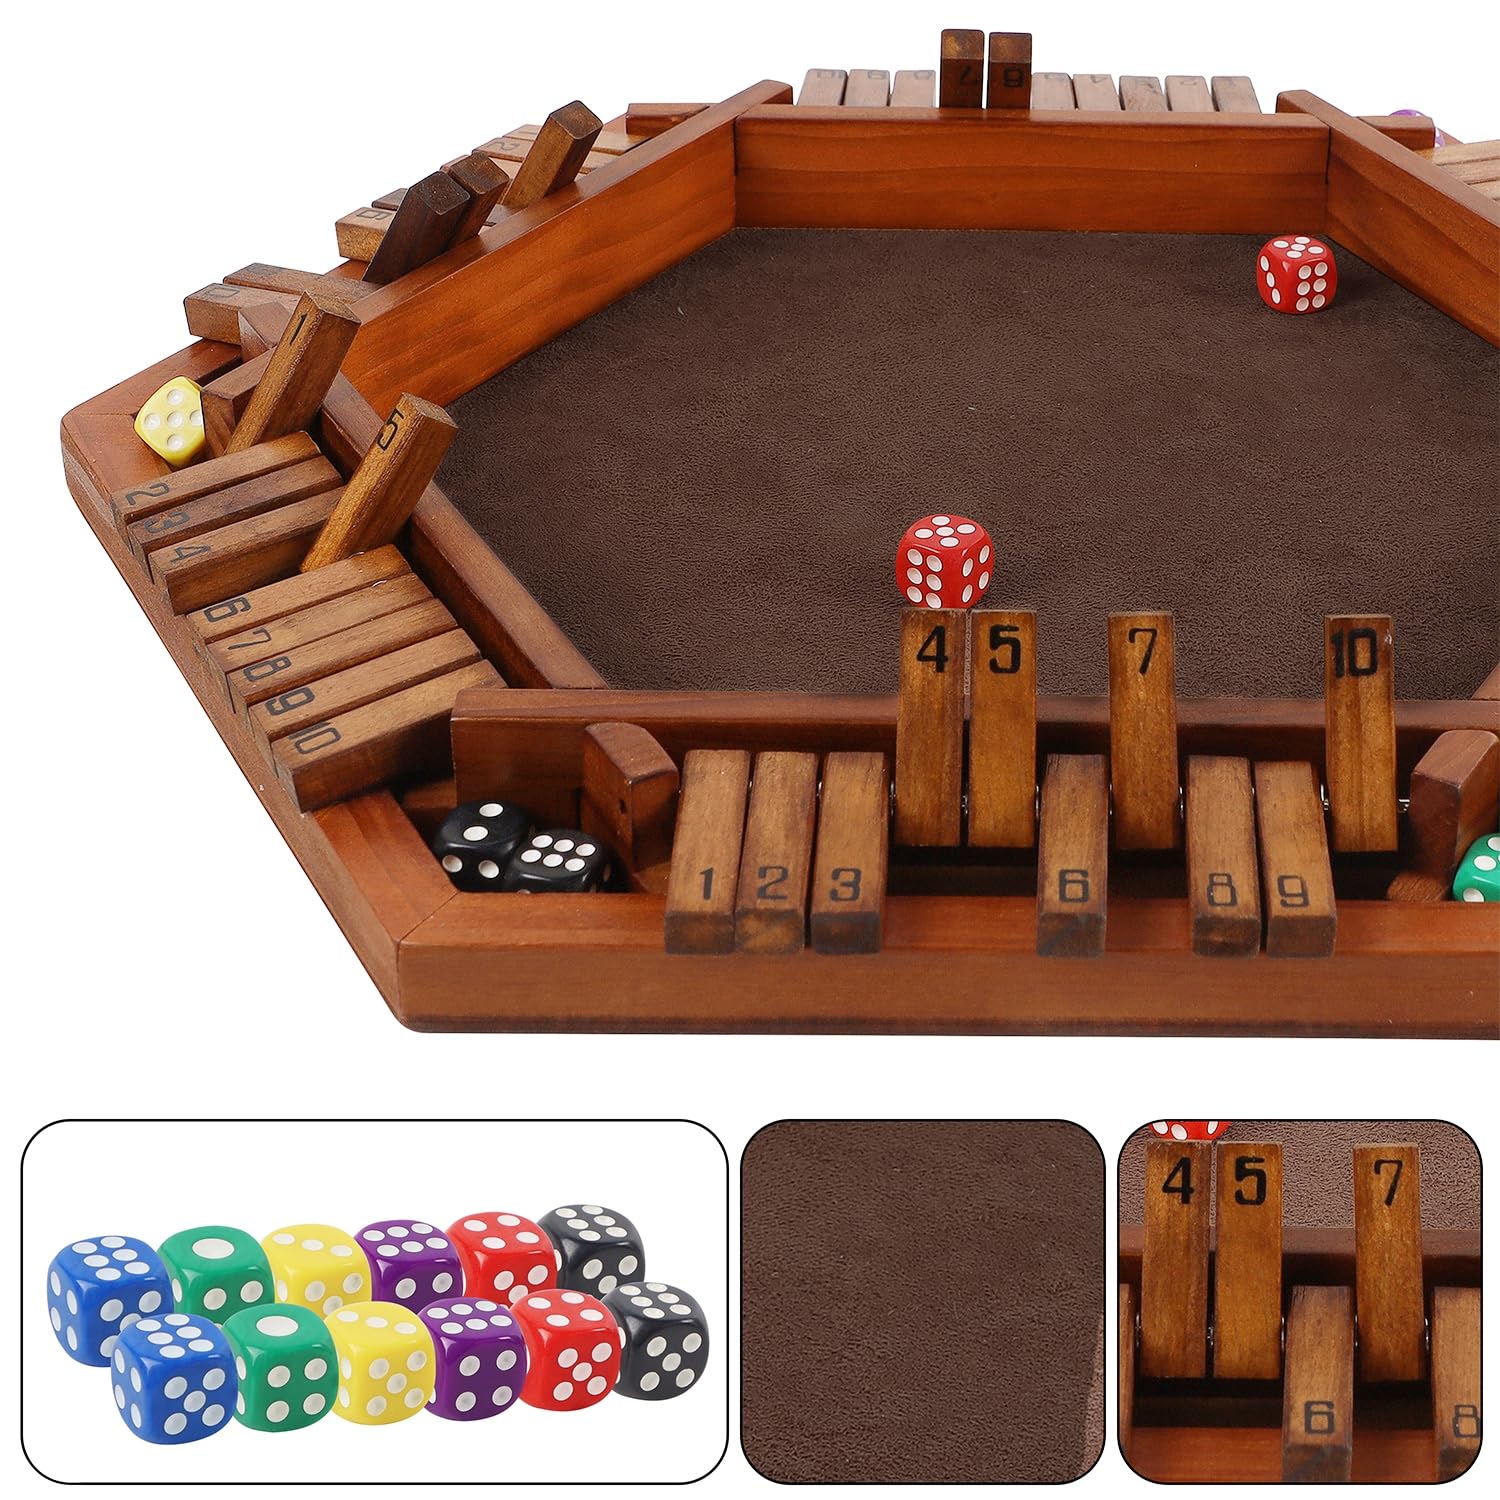 Juegoal Wooden Shut The Box Dice Game for 1-6 Players, Upgrade Tabletop Board Game with 12 Dice for Kids Adults Families, Classics Travel Portable Classroom Home Party Pub Board Game Sets